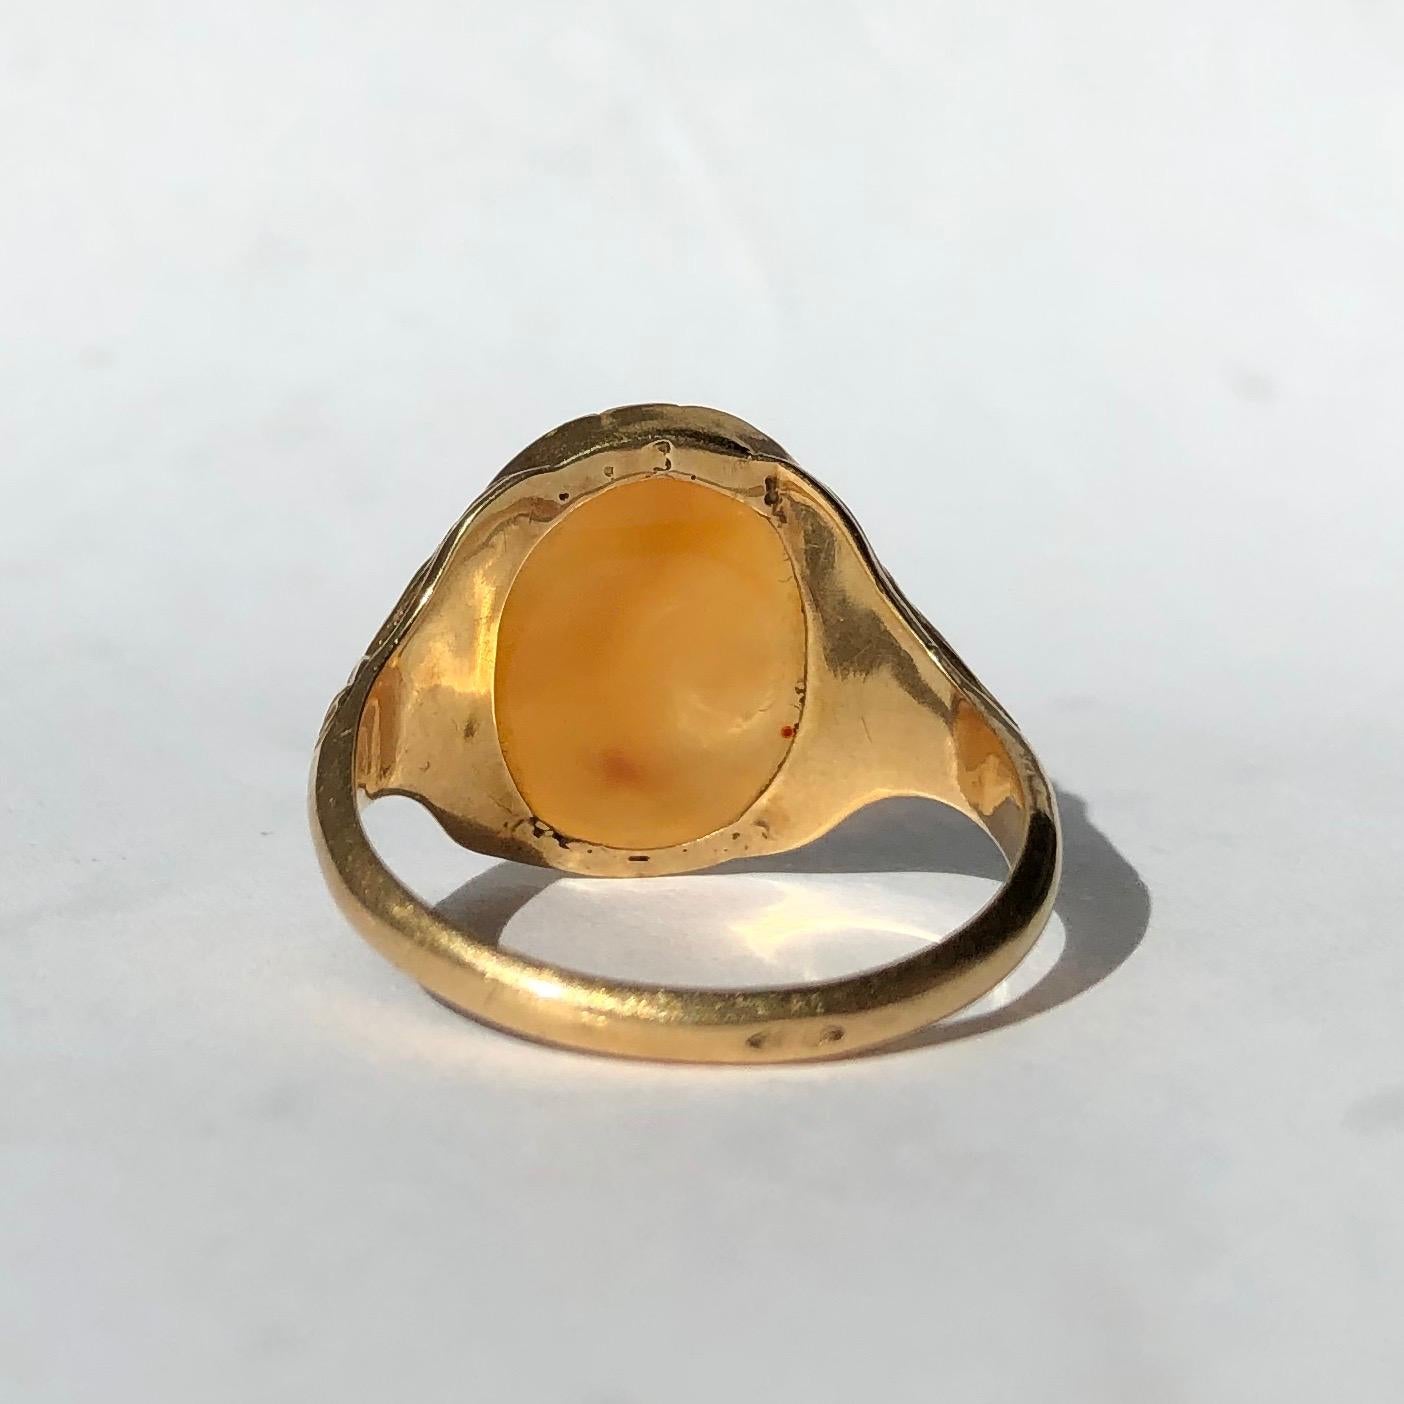 Edwardian Antique Agate and 9 Carat Gold Signet Ring